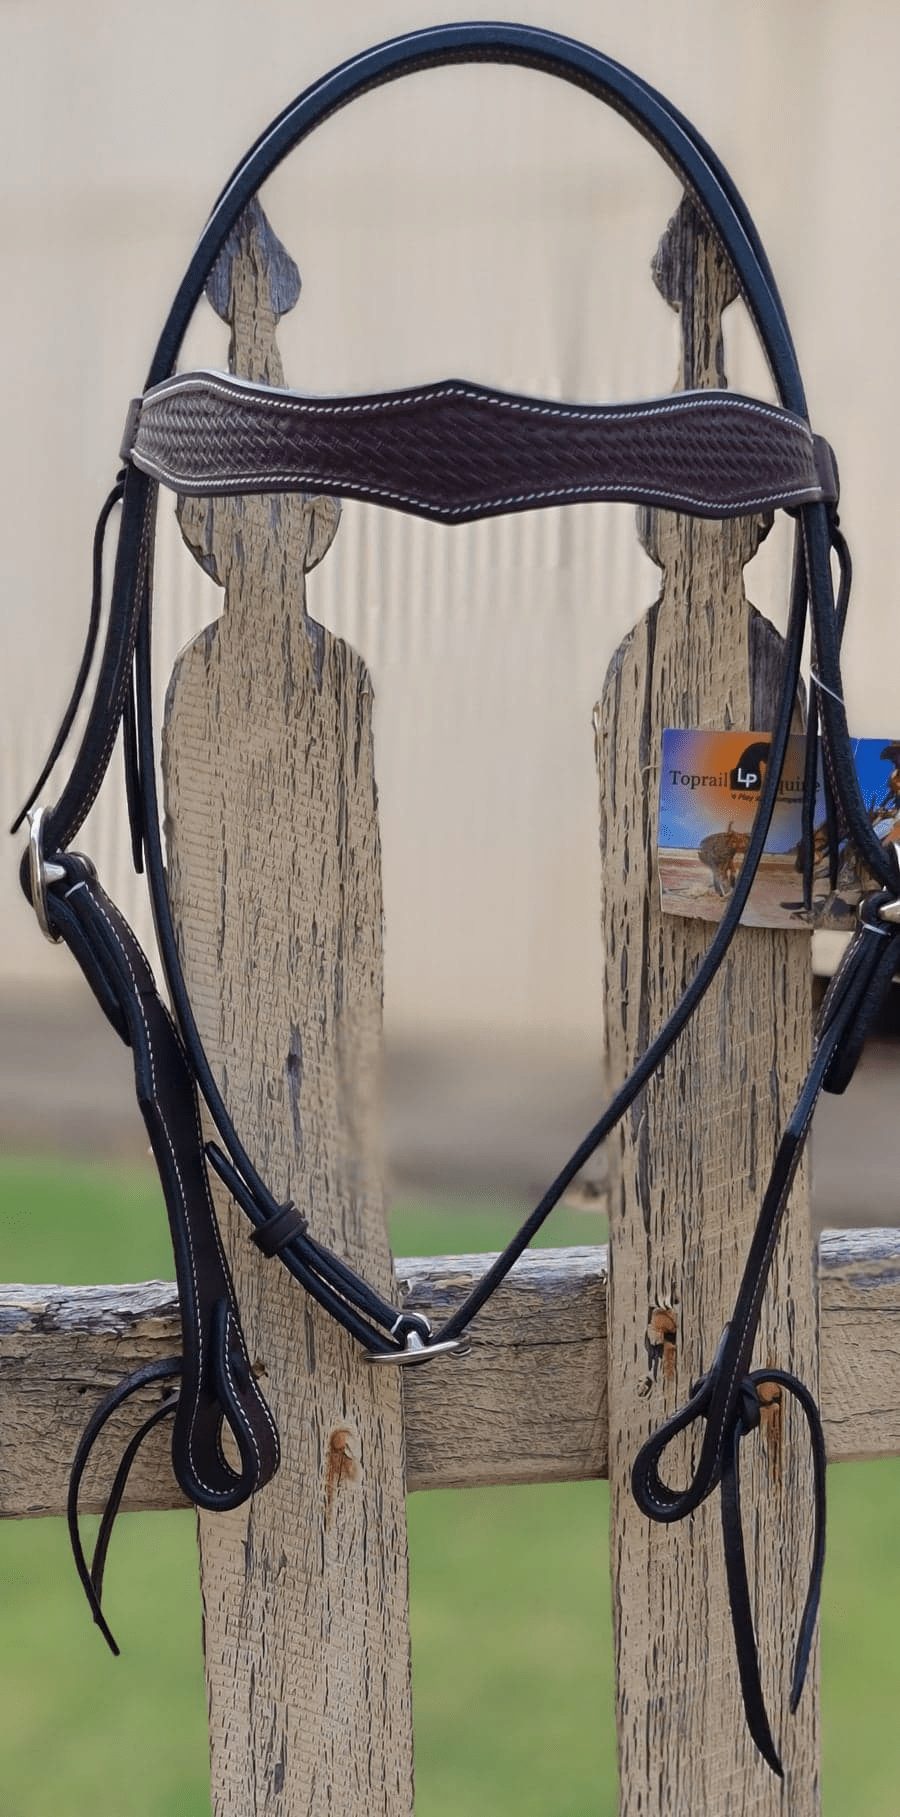 Top Rail Equine Bridles Full / Tan Toprail Bridle Daimond Western with Basket Tooling (2902A)